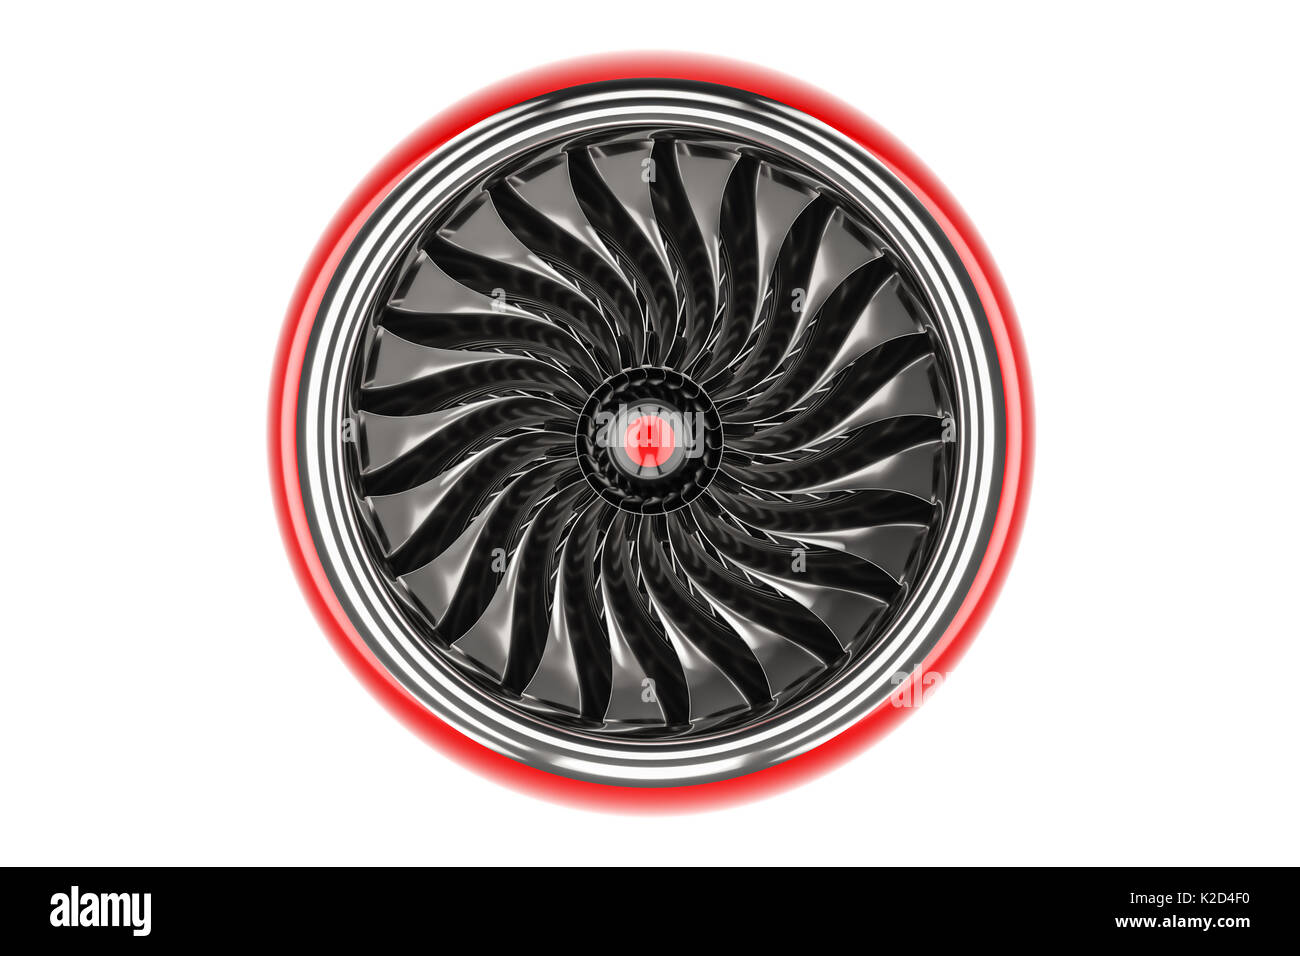 Red jet engine, front view. 3D rendering isolated on white background Stock Photo